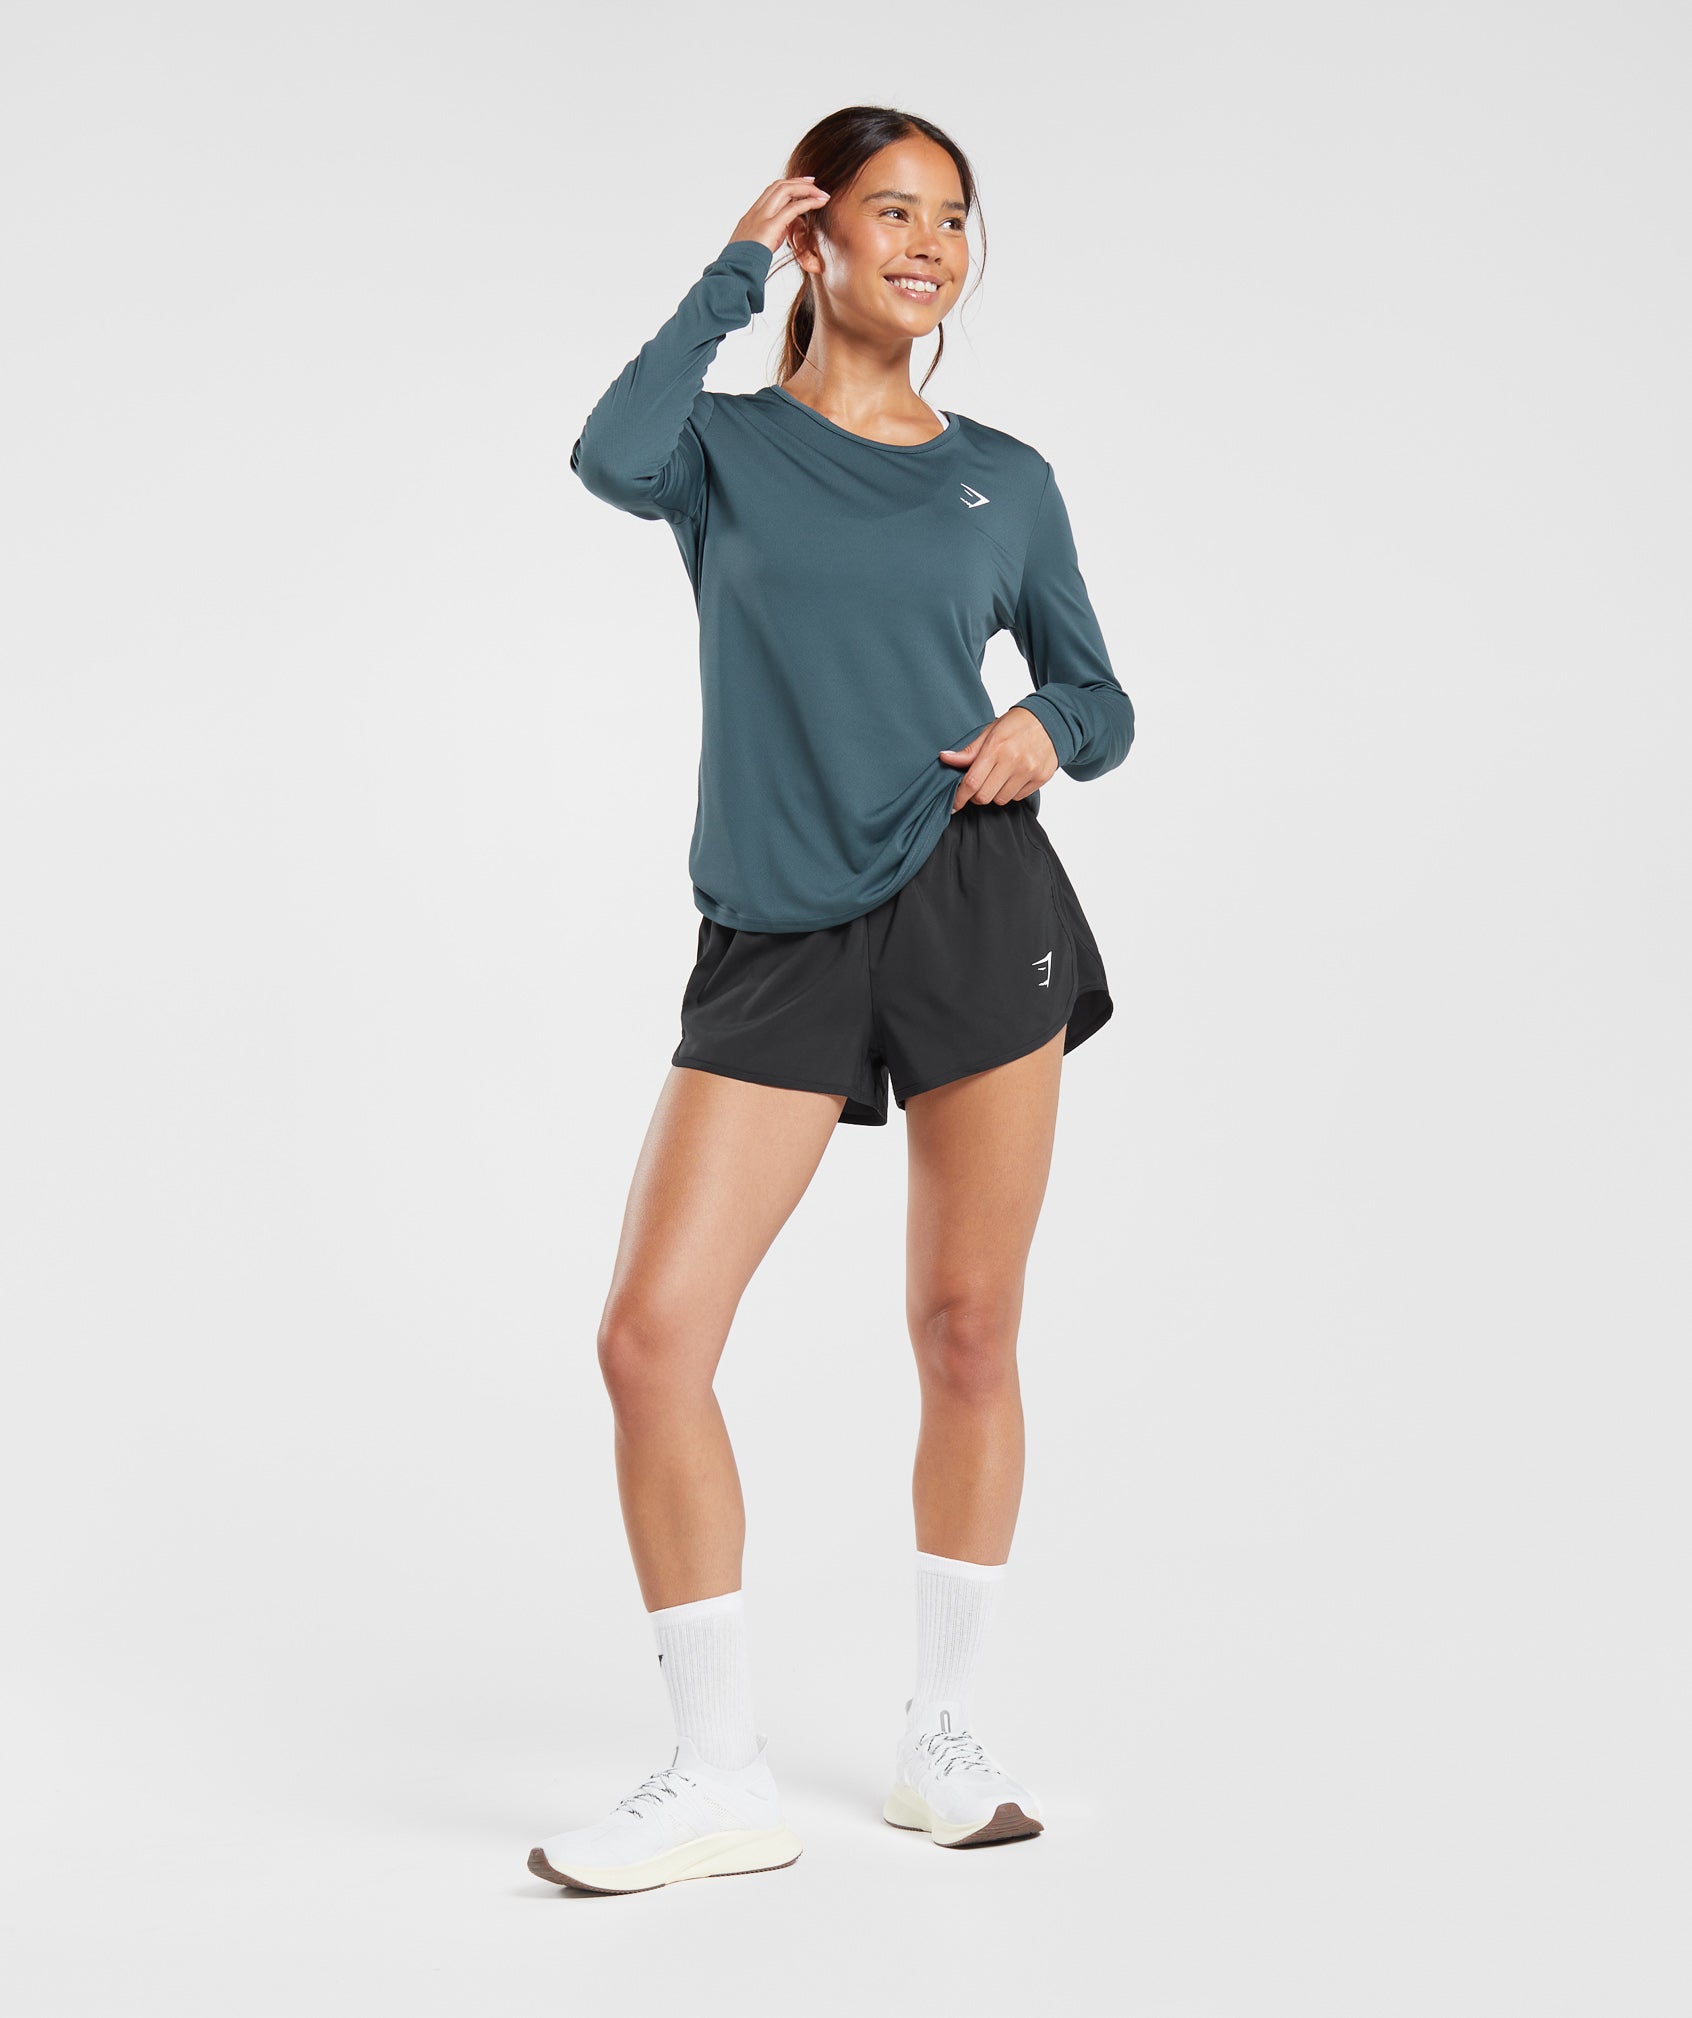 Training Long Sleeve Top in Smokey Teal - view 4